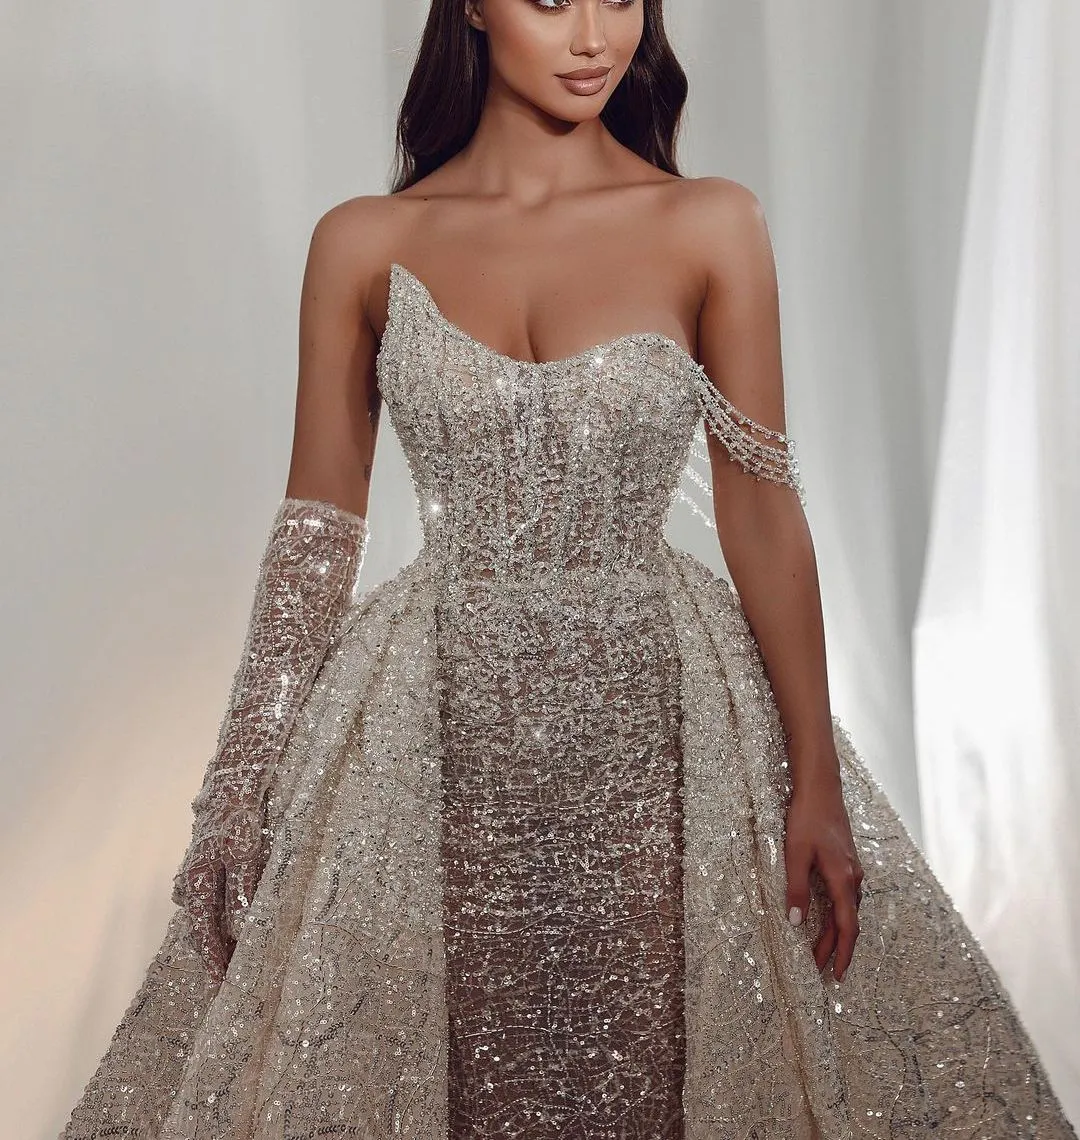 Luxury Mermaid Prom Dresses One Long Sleeve V Neck Strapless Appliques Sequins Beaded Floor Length Detachable Train Evening Dress Bridal Gowns Plus Size Custom Made